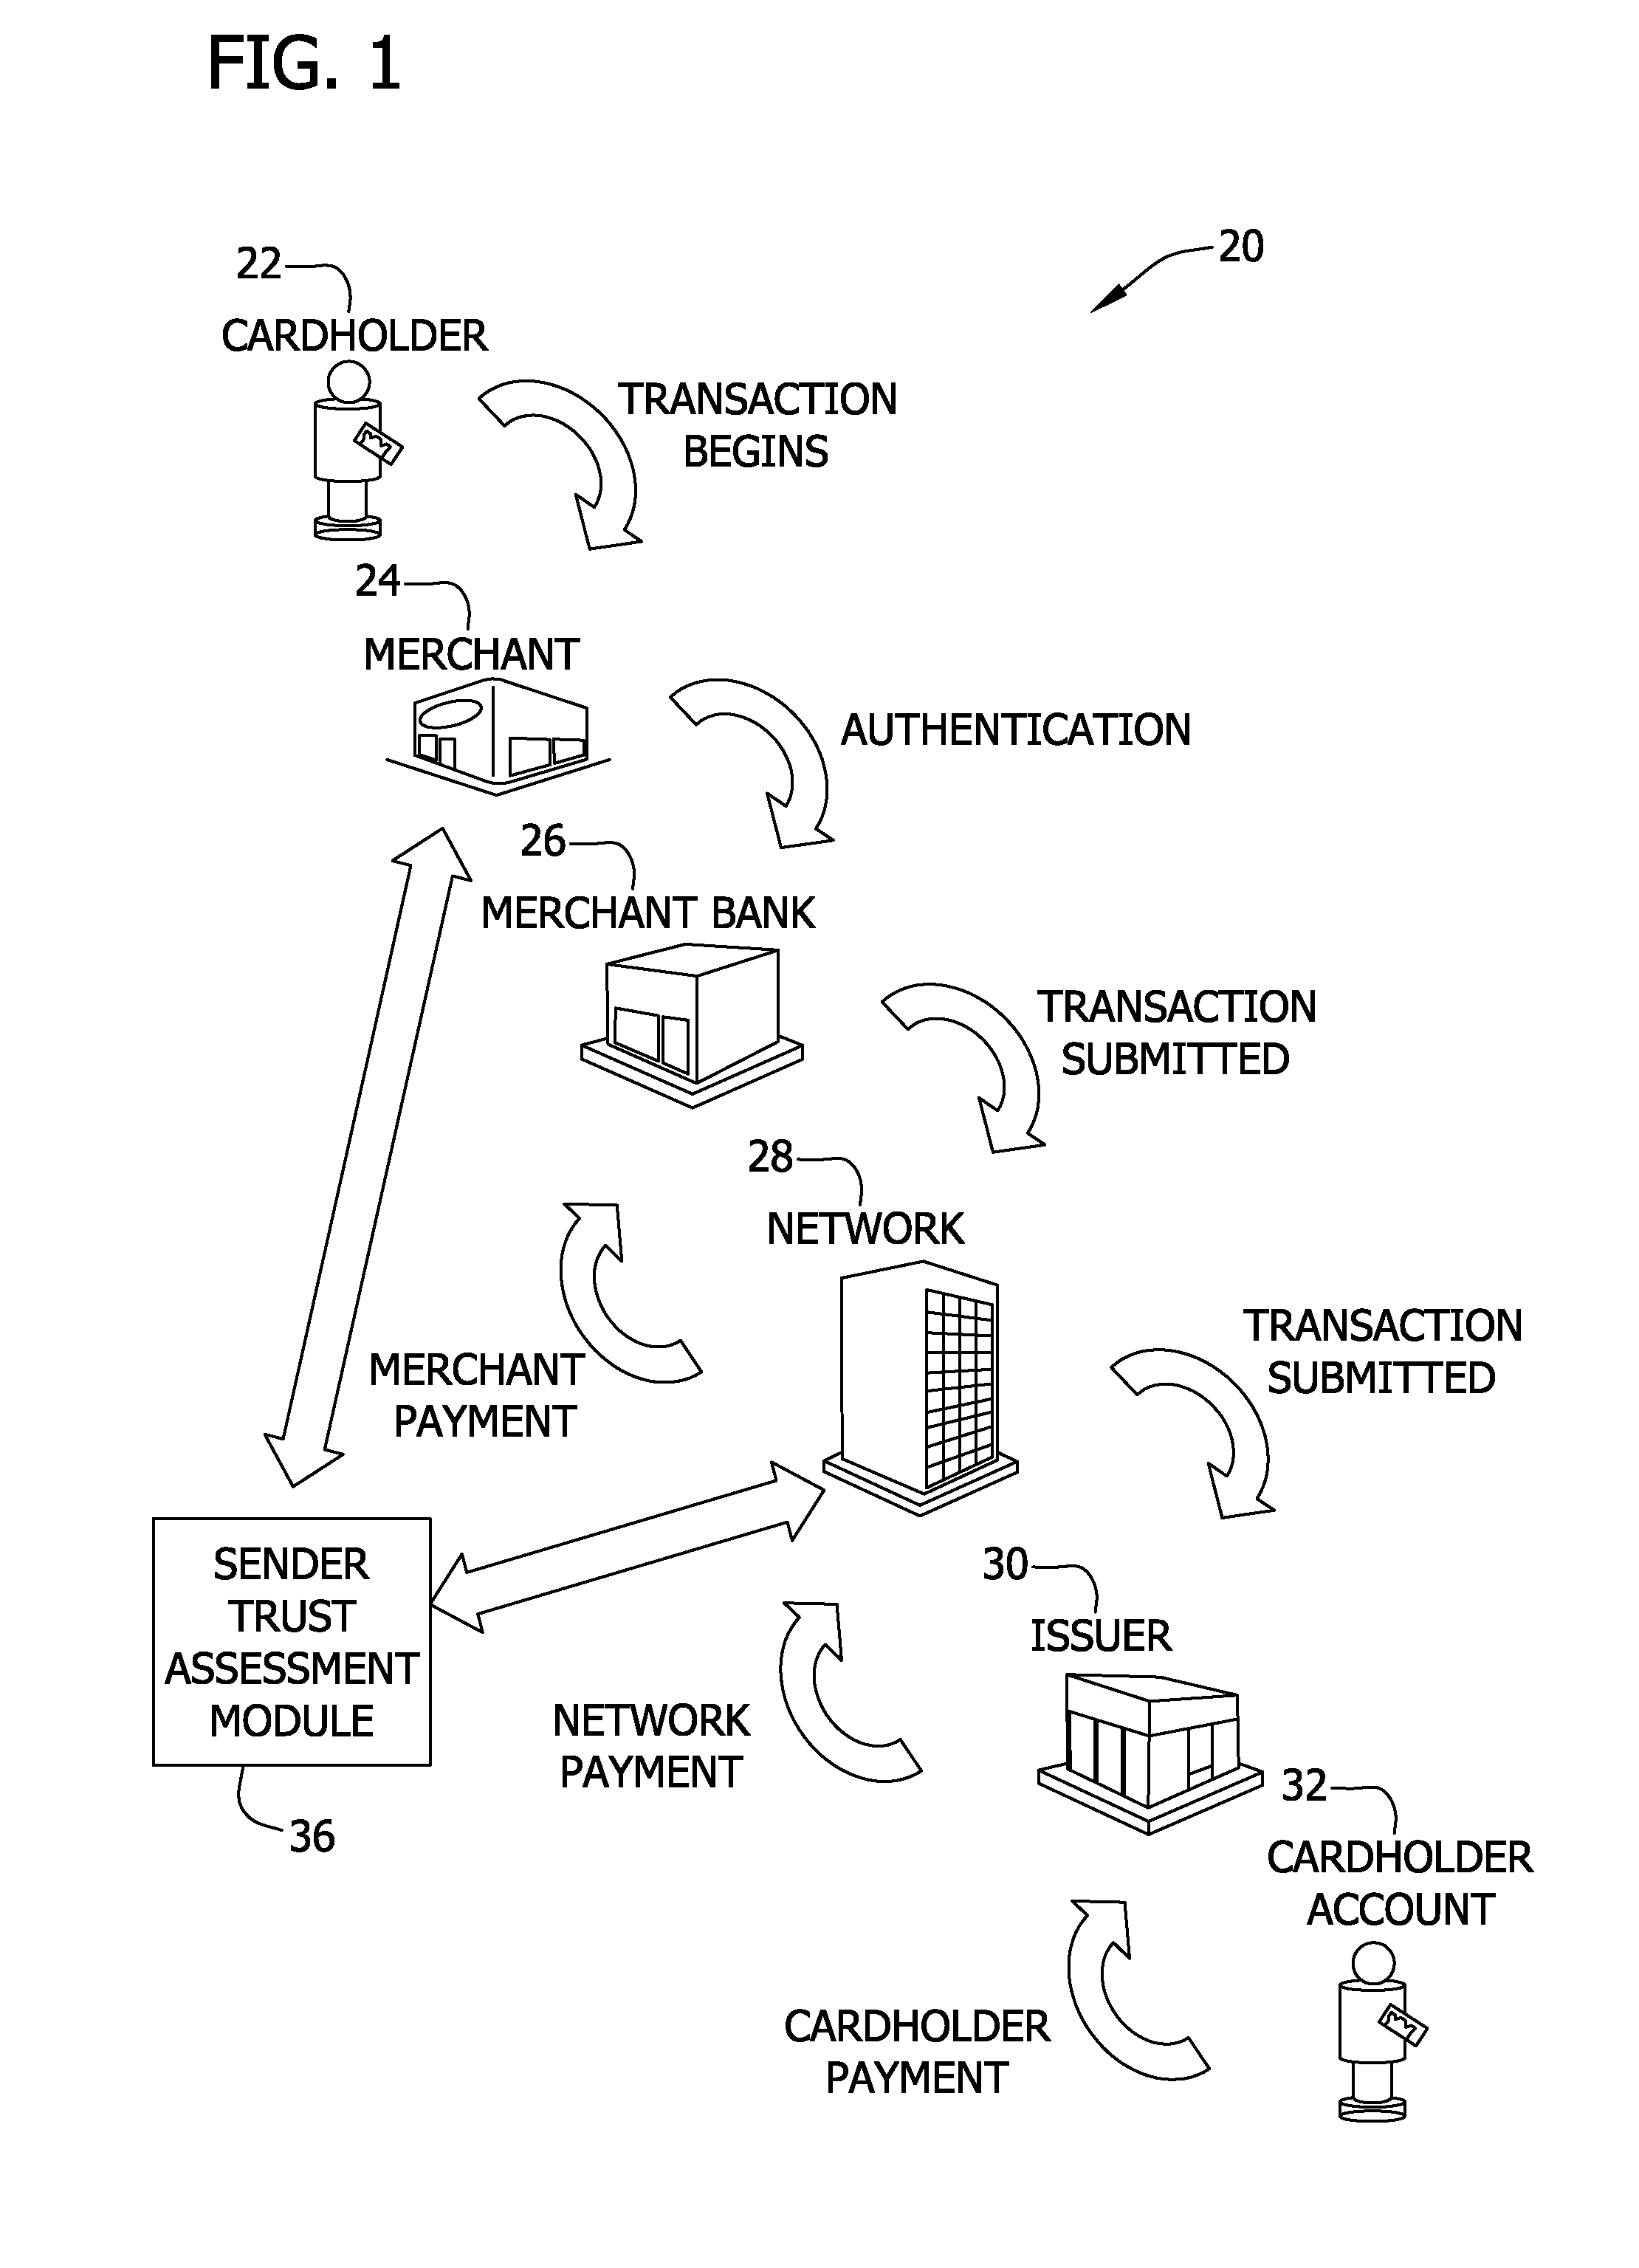 Systems and methods for risk based decisioning